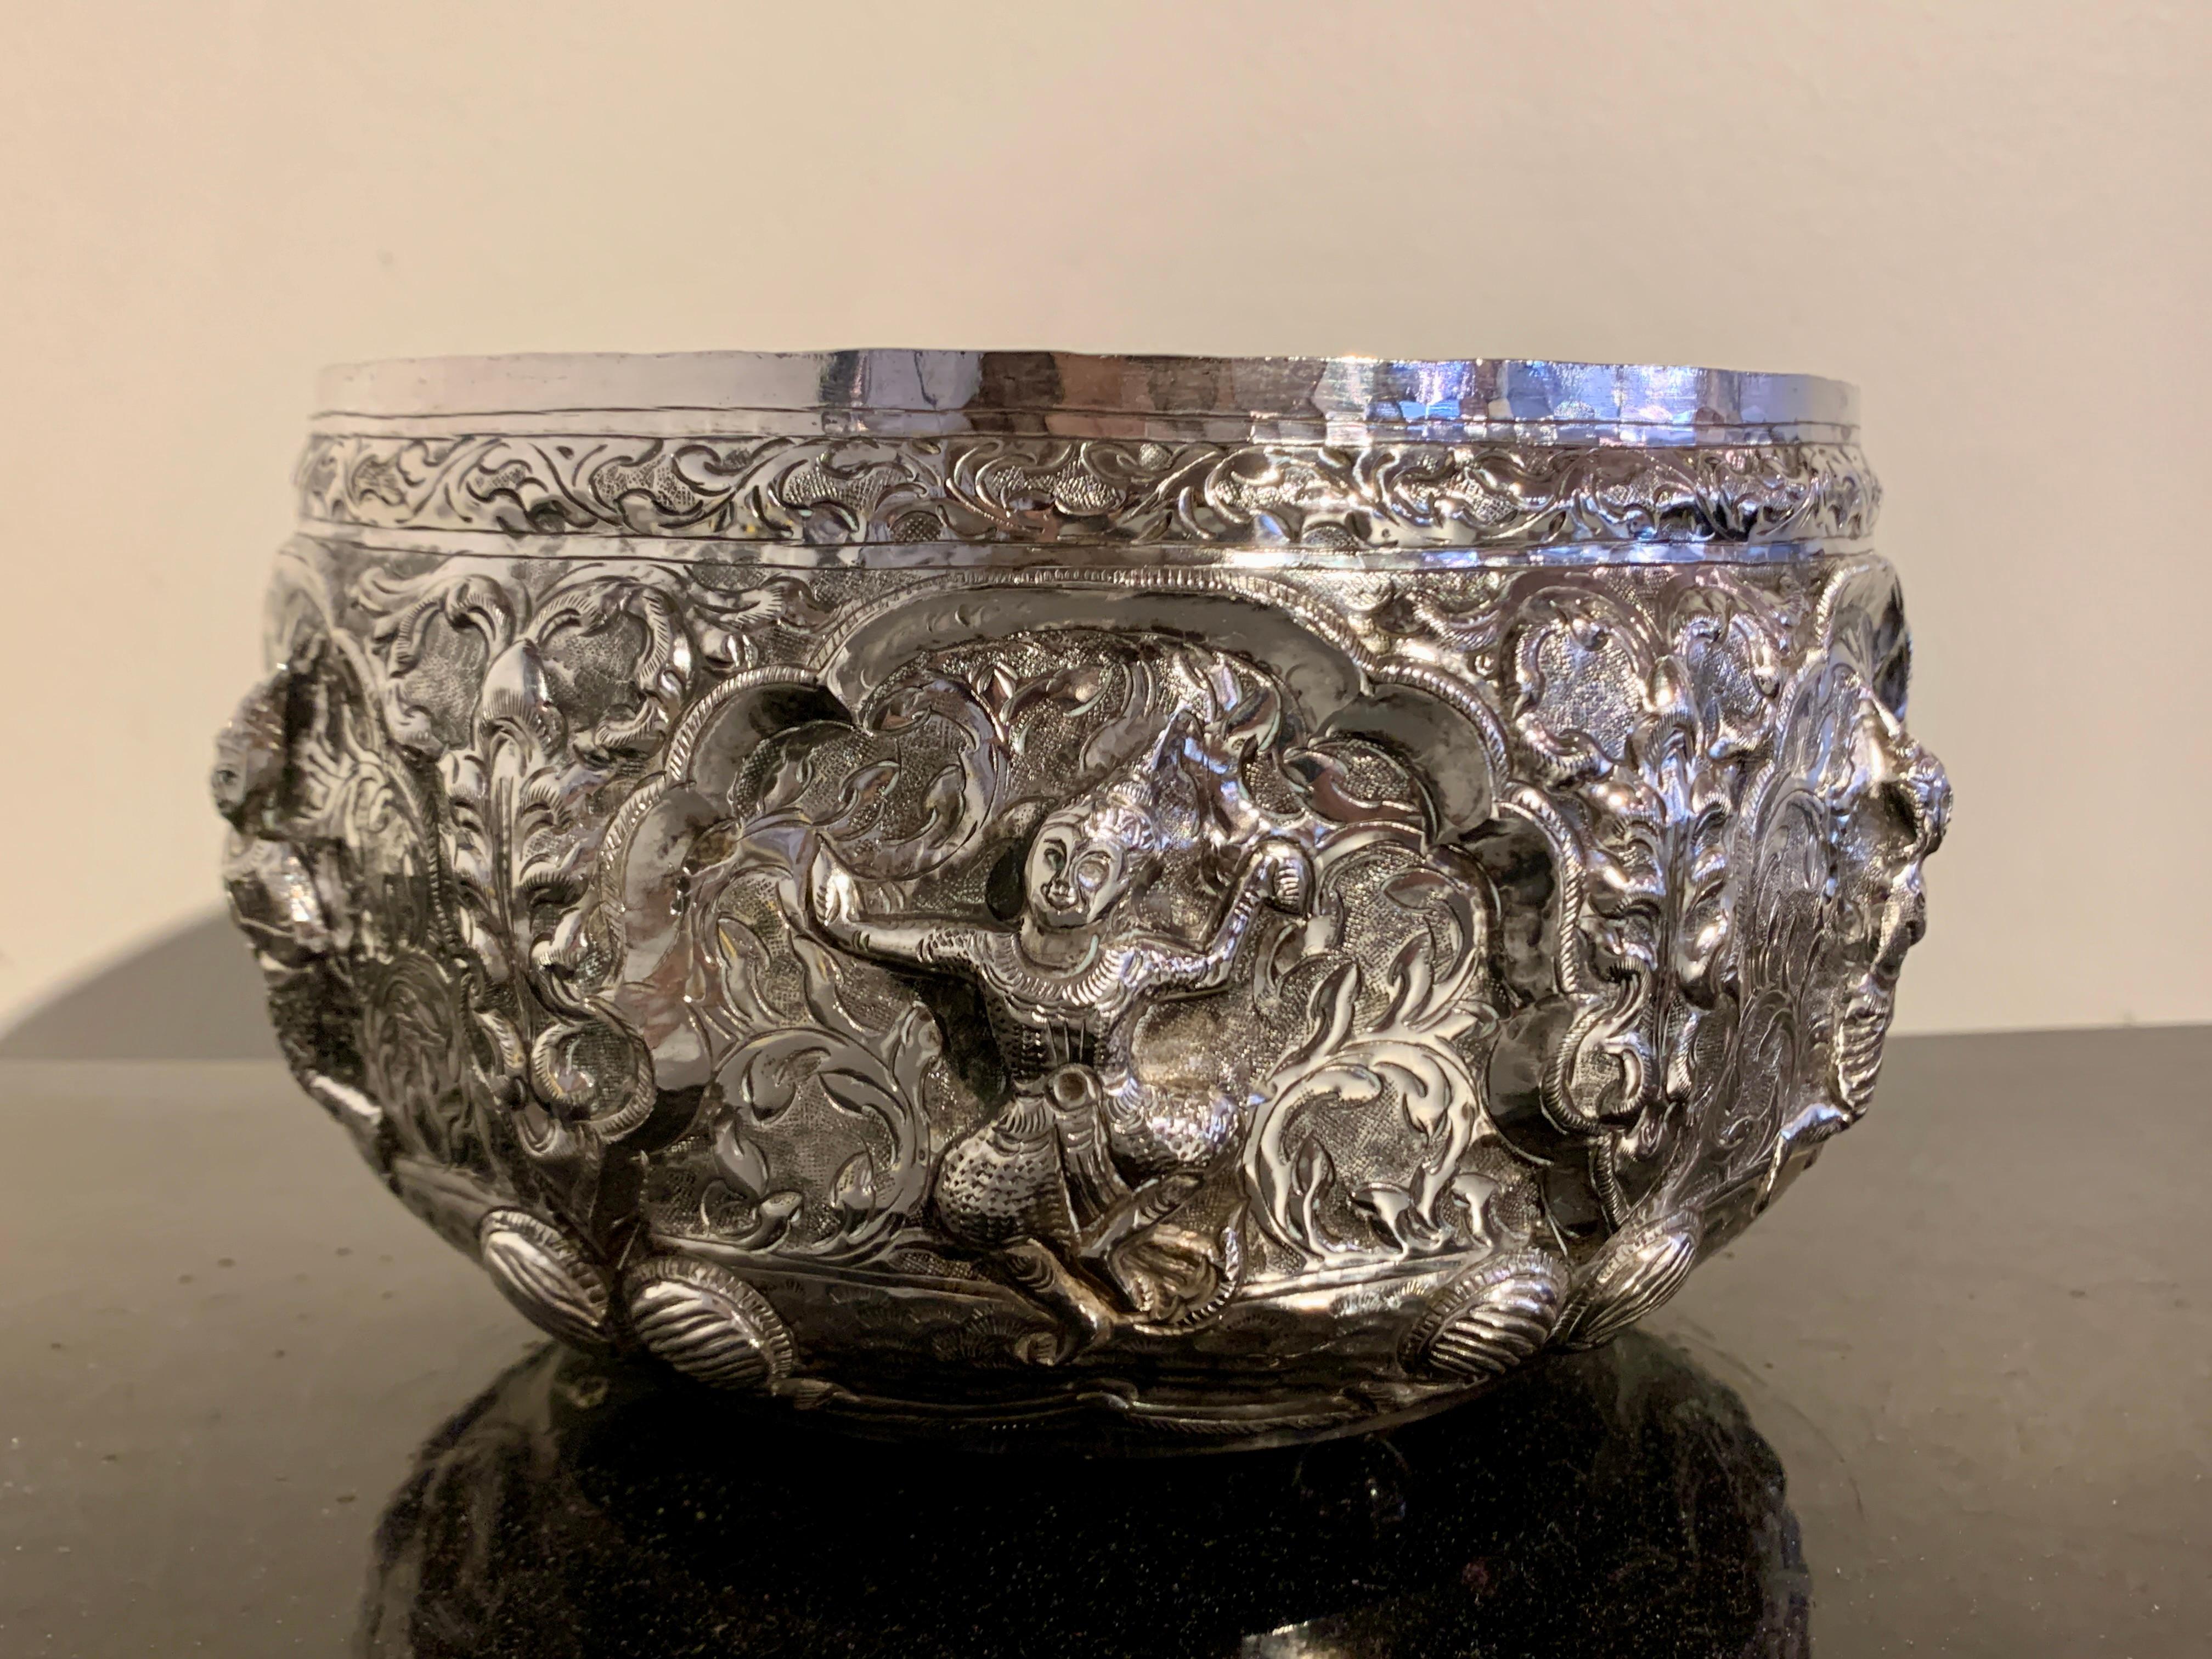 A large and impressive vintage Thai silver offering bowl by Damrong Silp Silverware, circa 1960's, Chiang Mai, Thailand.

Beautifully hand crafted using traditional methods, the large silver bowl features images of Thai classical dancers in